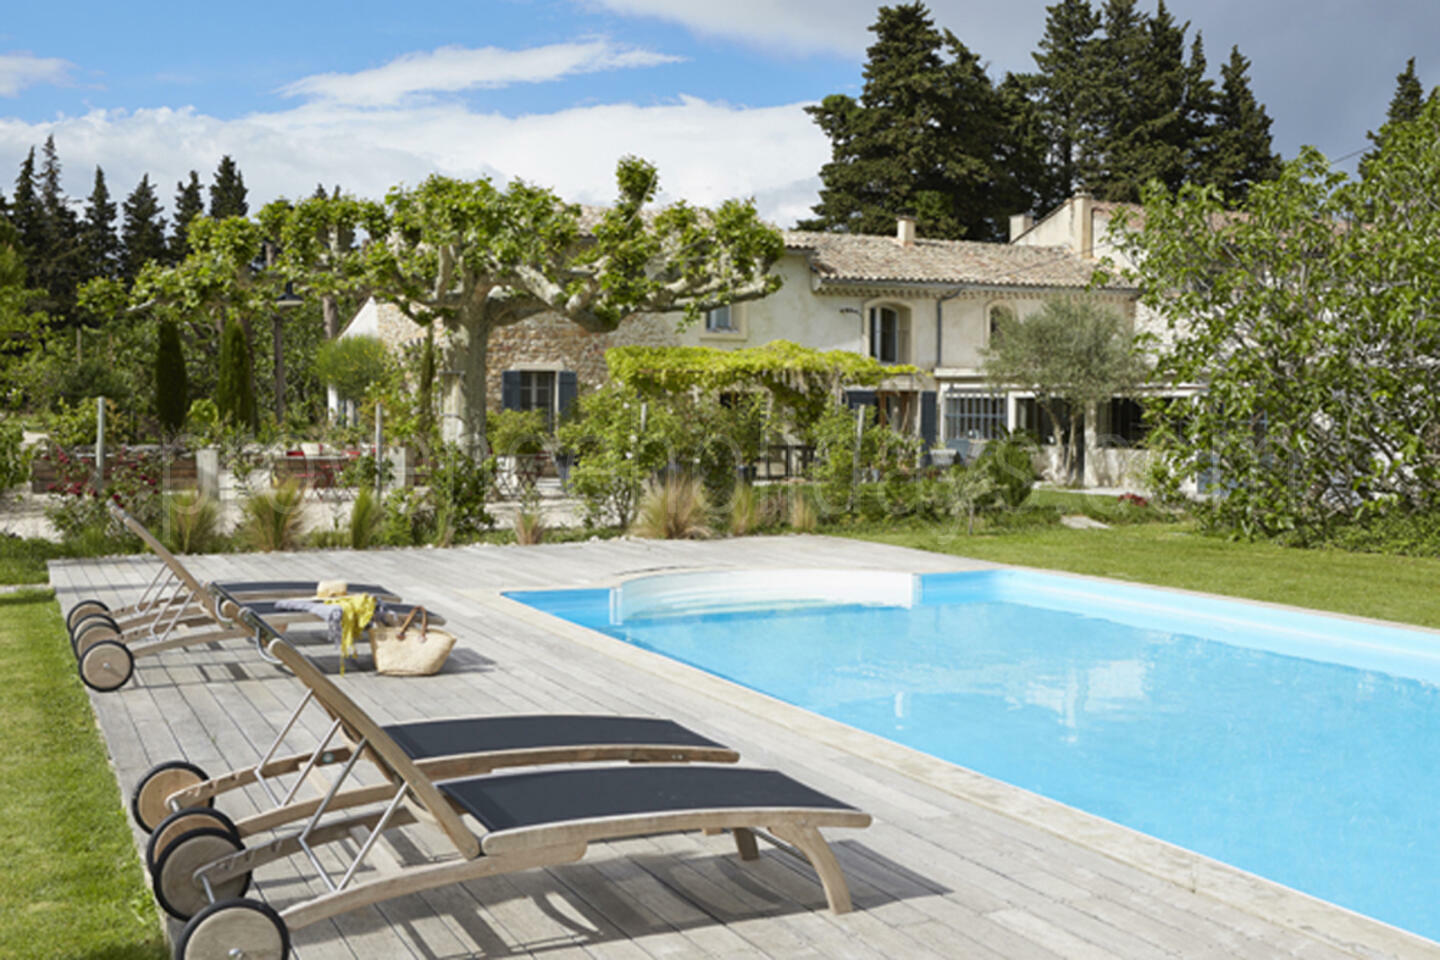 Pet-Friendly Holiday Rental with Pool House -1 - Maison Sarrians: Villa: Pool